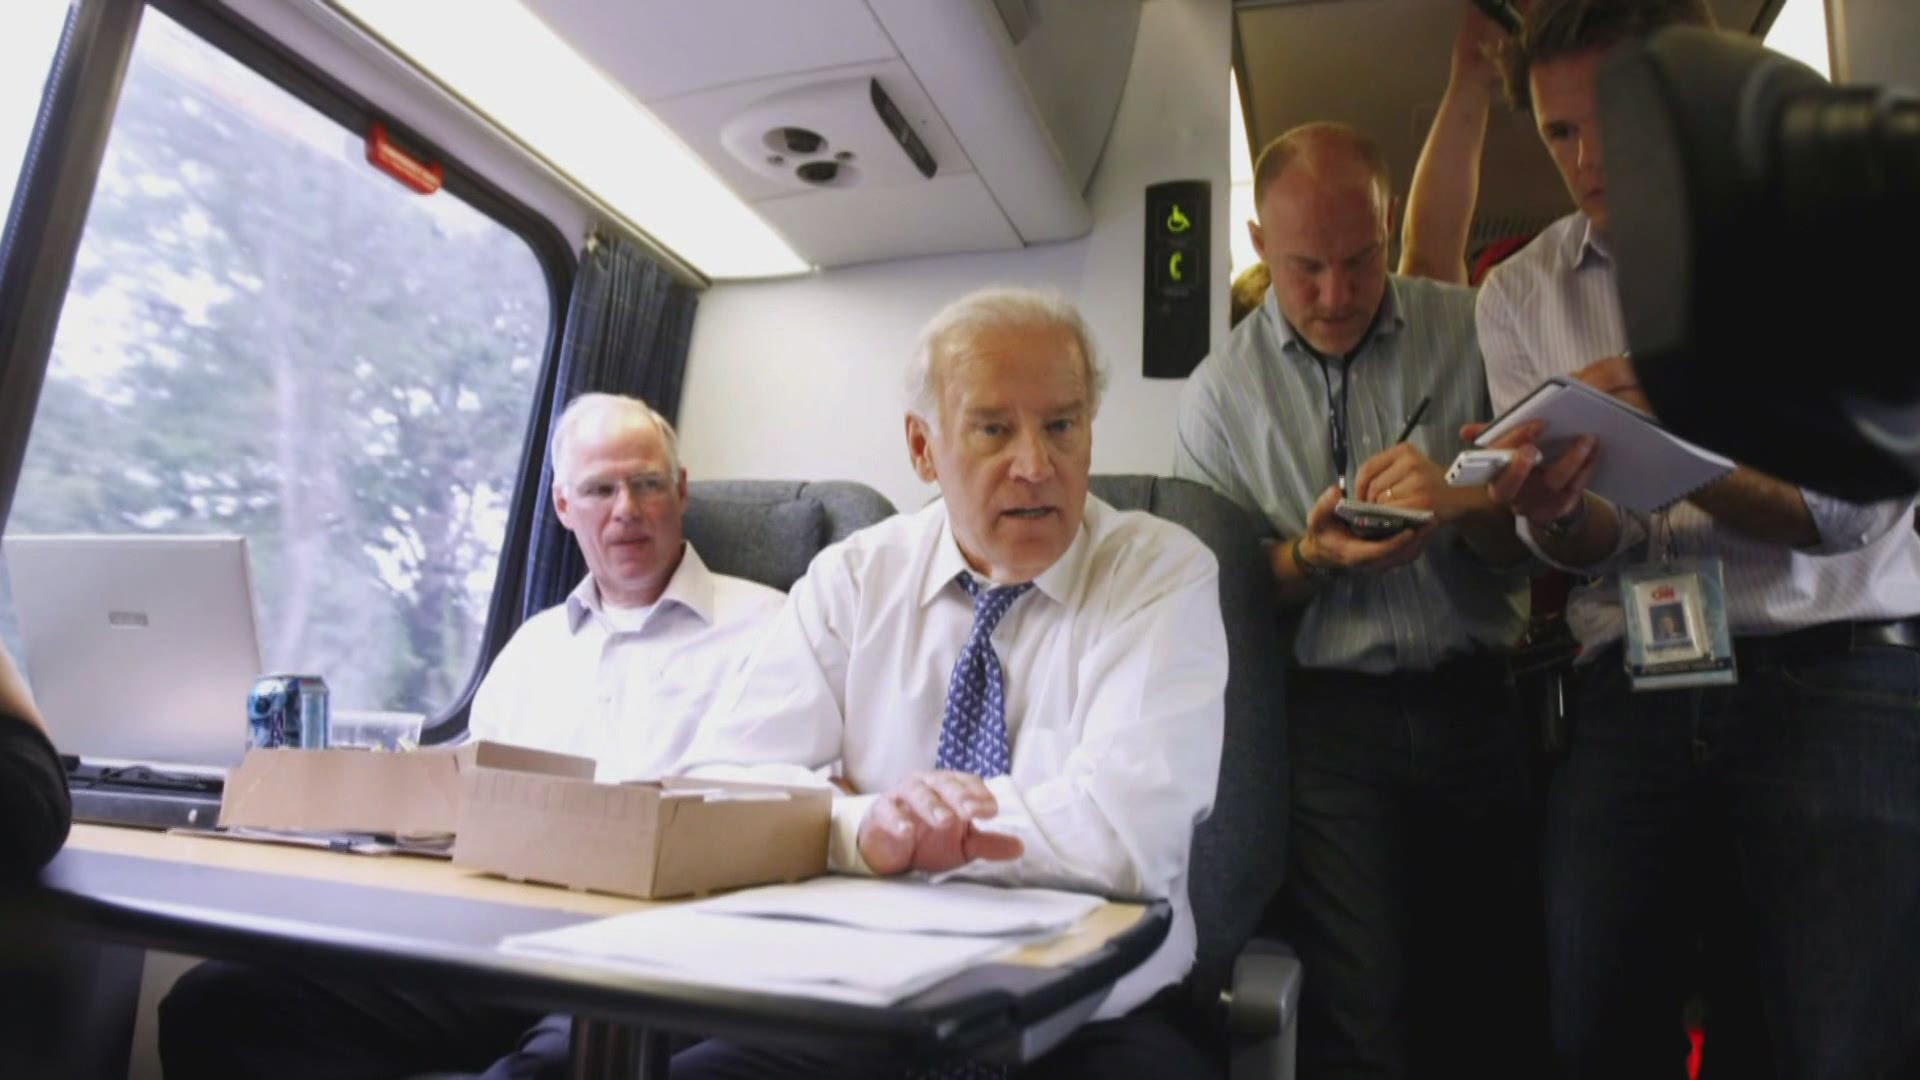 In President Biden's first 100 days there are some supporters and there are critics.